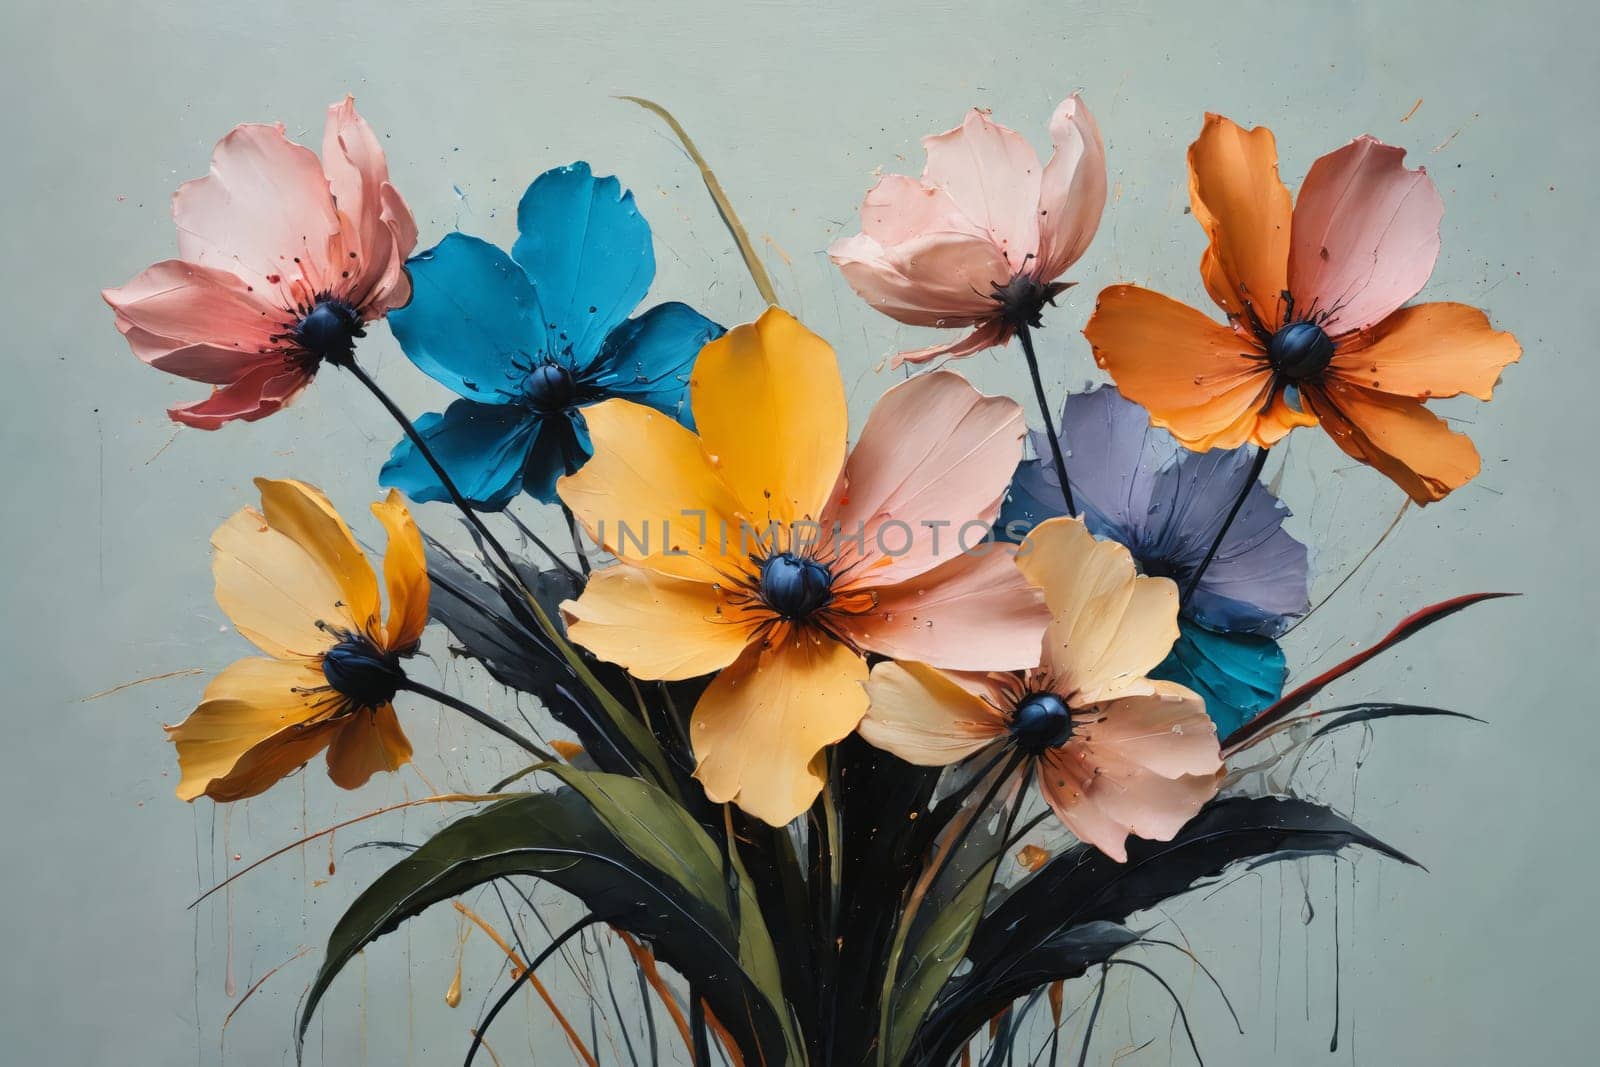 A Rainbow of Blooms in Abstract Artistry by Andre1ns